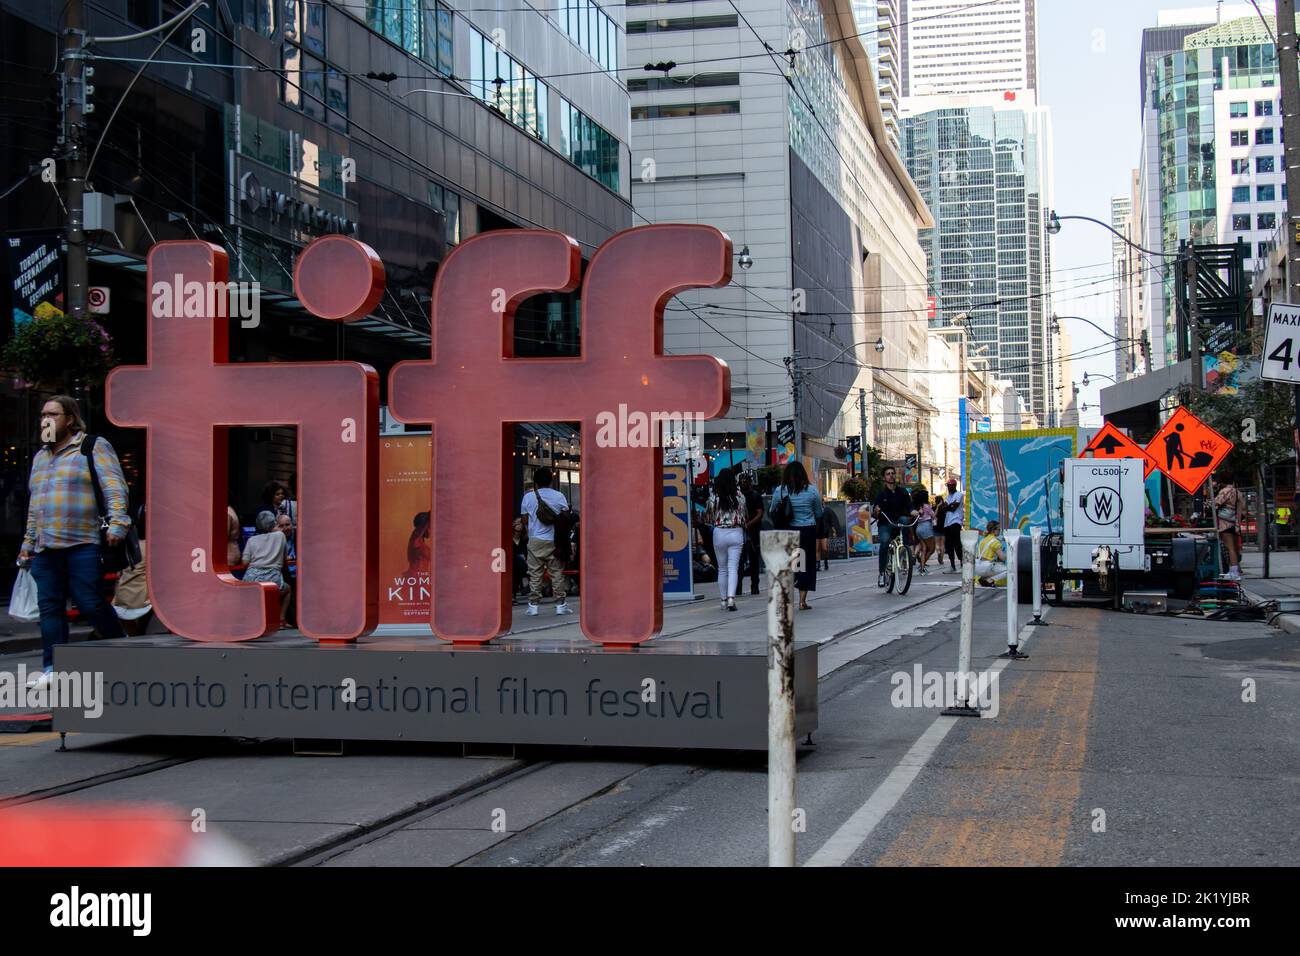 A TIFF, Toronto International Film Festival sign at the entrance to King St. during the day at the popular film festival in downtown Toronto. Stock Photo